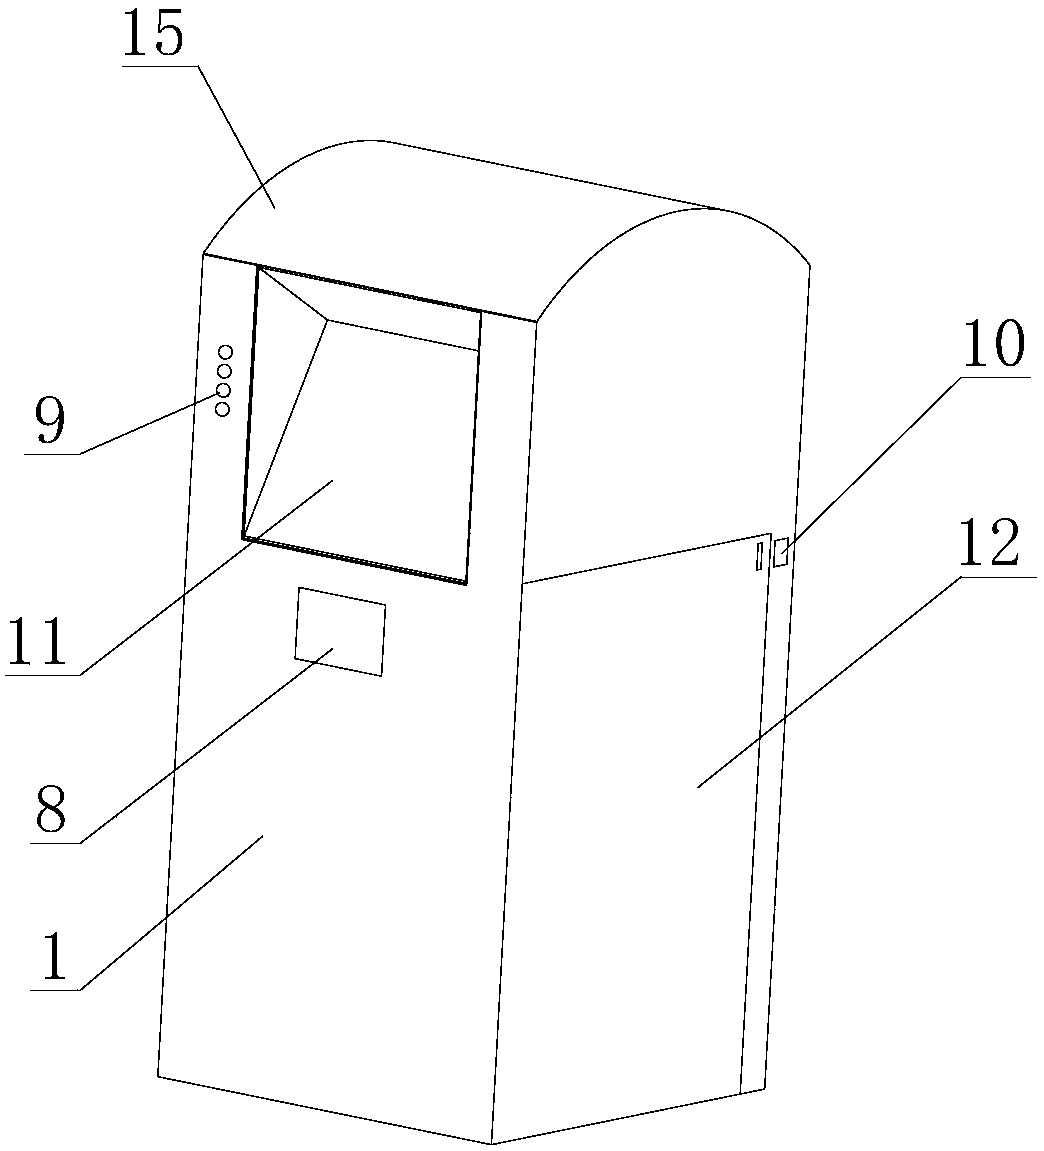 Low-power-consumption intelligent garbage bin and method of using same